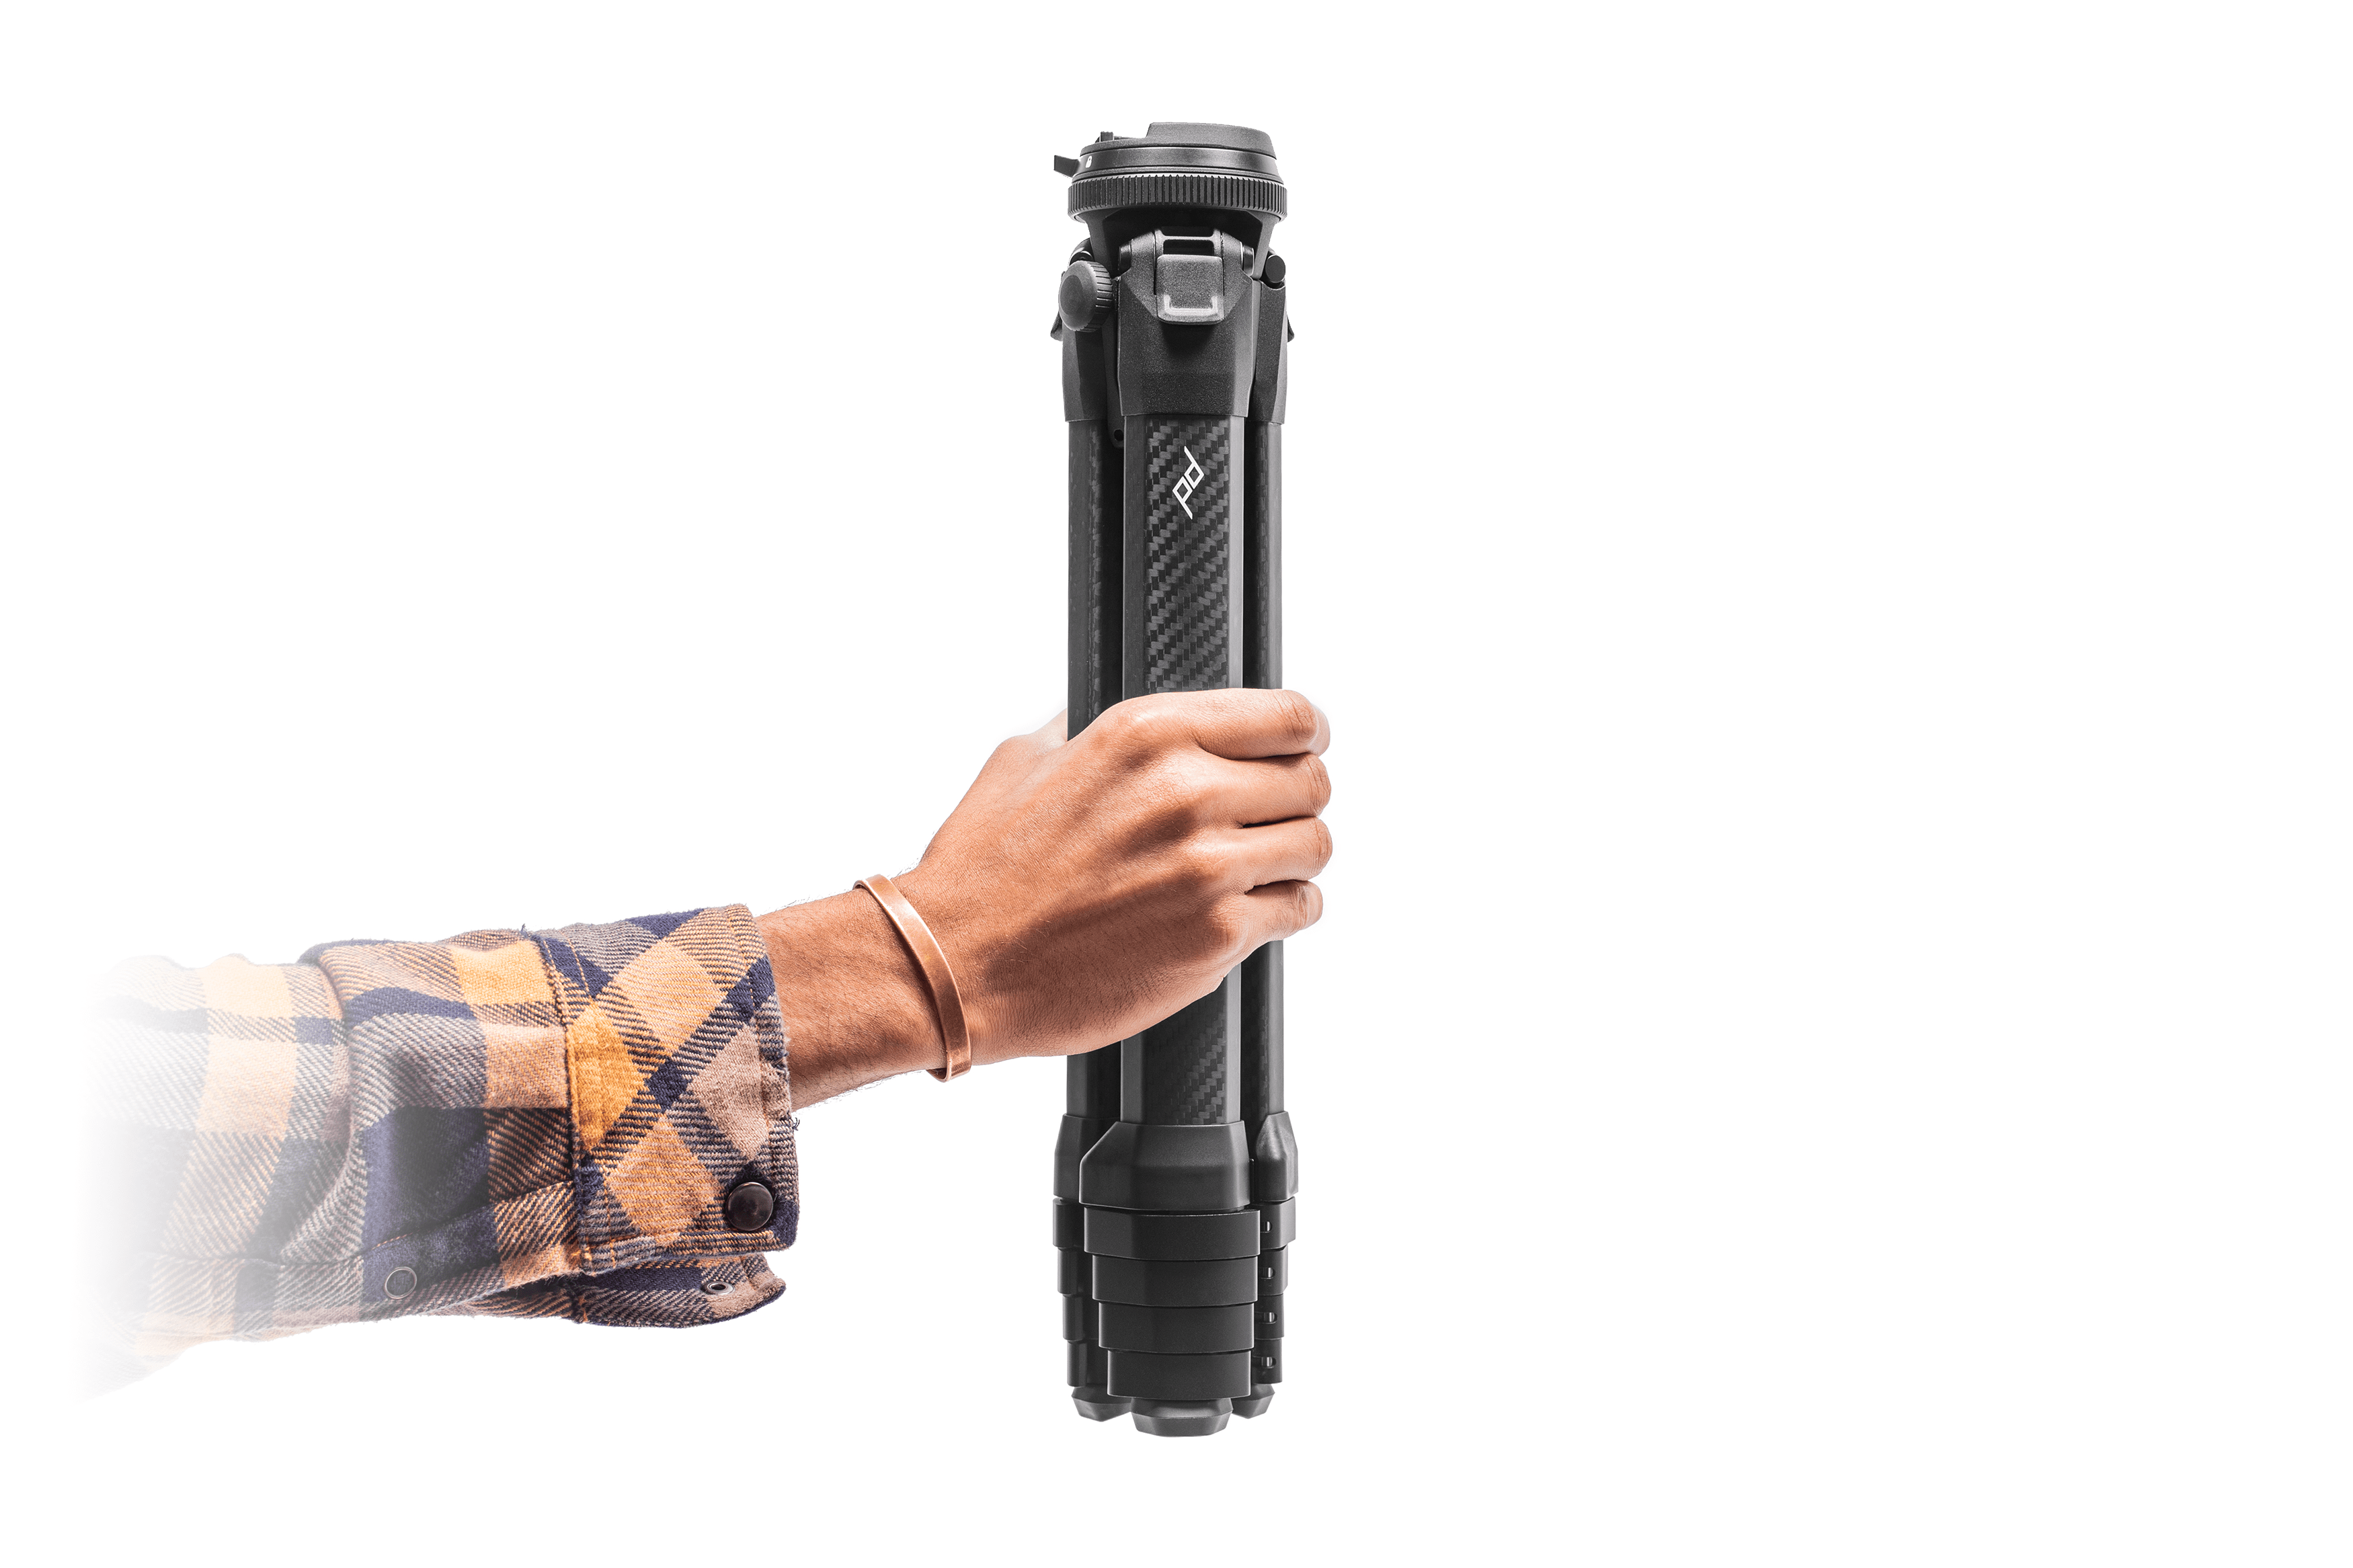 My Experience with the Peak Design Travel Tripod